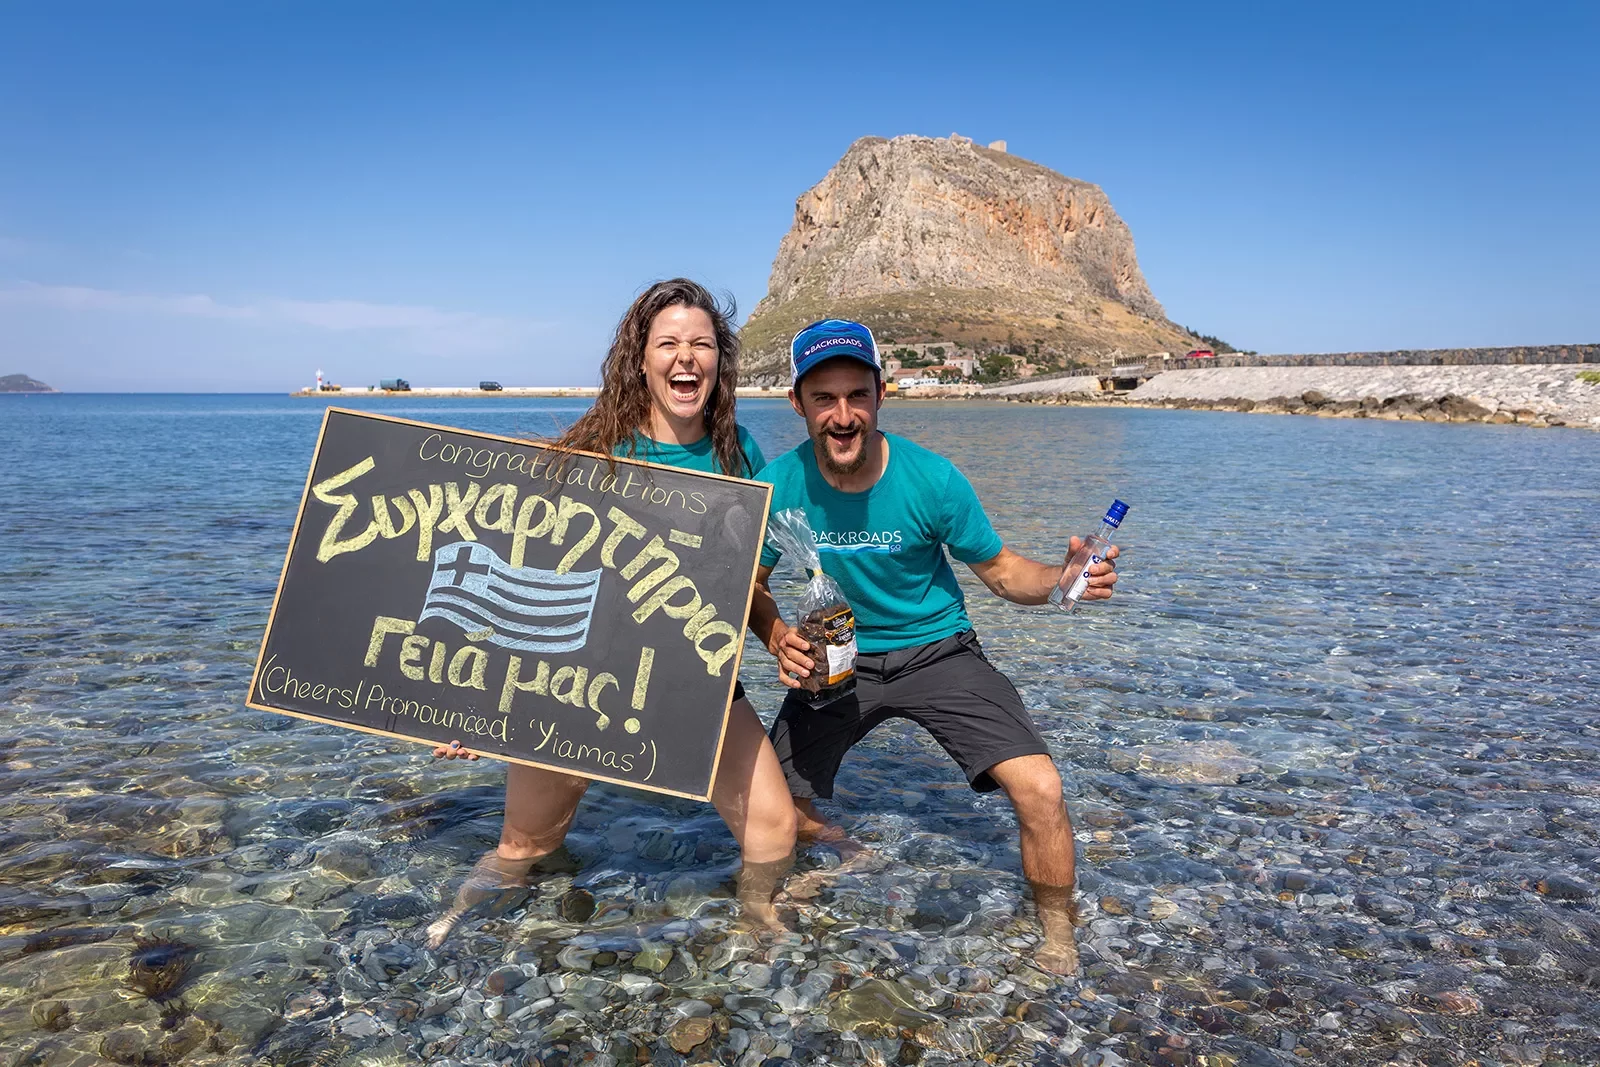 Two leaders holding Greek lettered &quot;Congratulations&quot; signage, standing in shallow water.